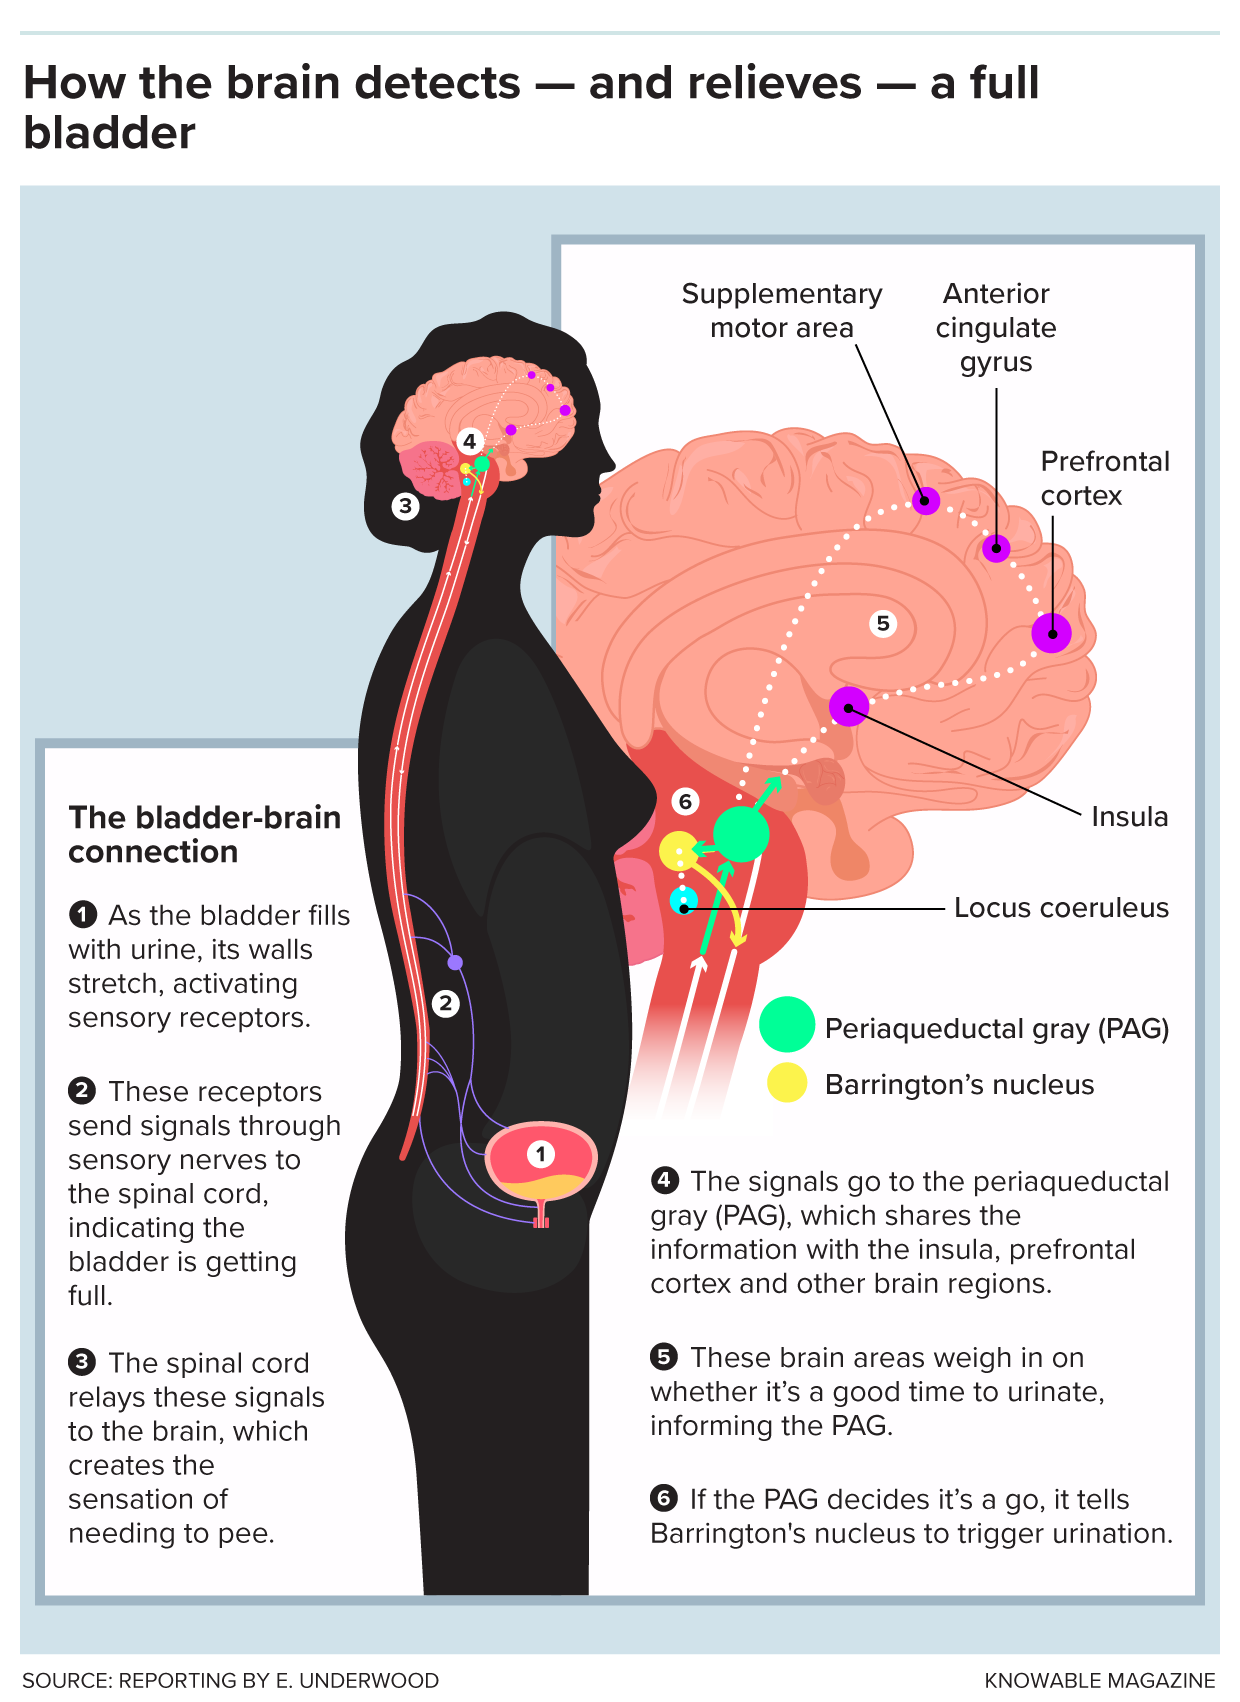 Illustration: A six-step diagram showing how sensations of fullness travel up the spinal cord from the bladder to the brainstem and higher brain regions. Collectively, these regions tell the brain’s urinary control center, Barrington’s nucleus, that we’re in a safe and appropriate place to pee, allowing us to release urine on cue.